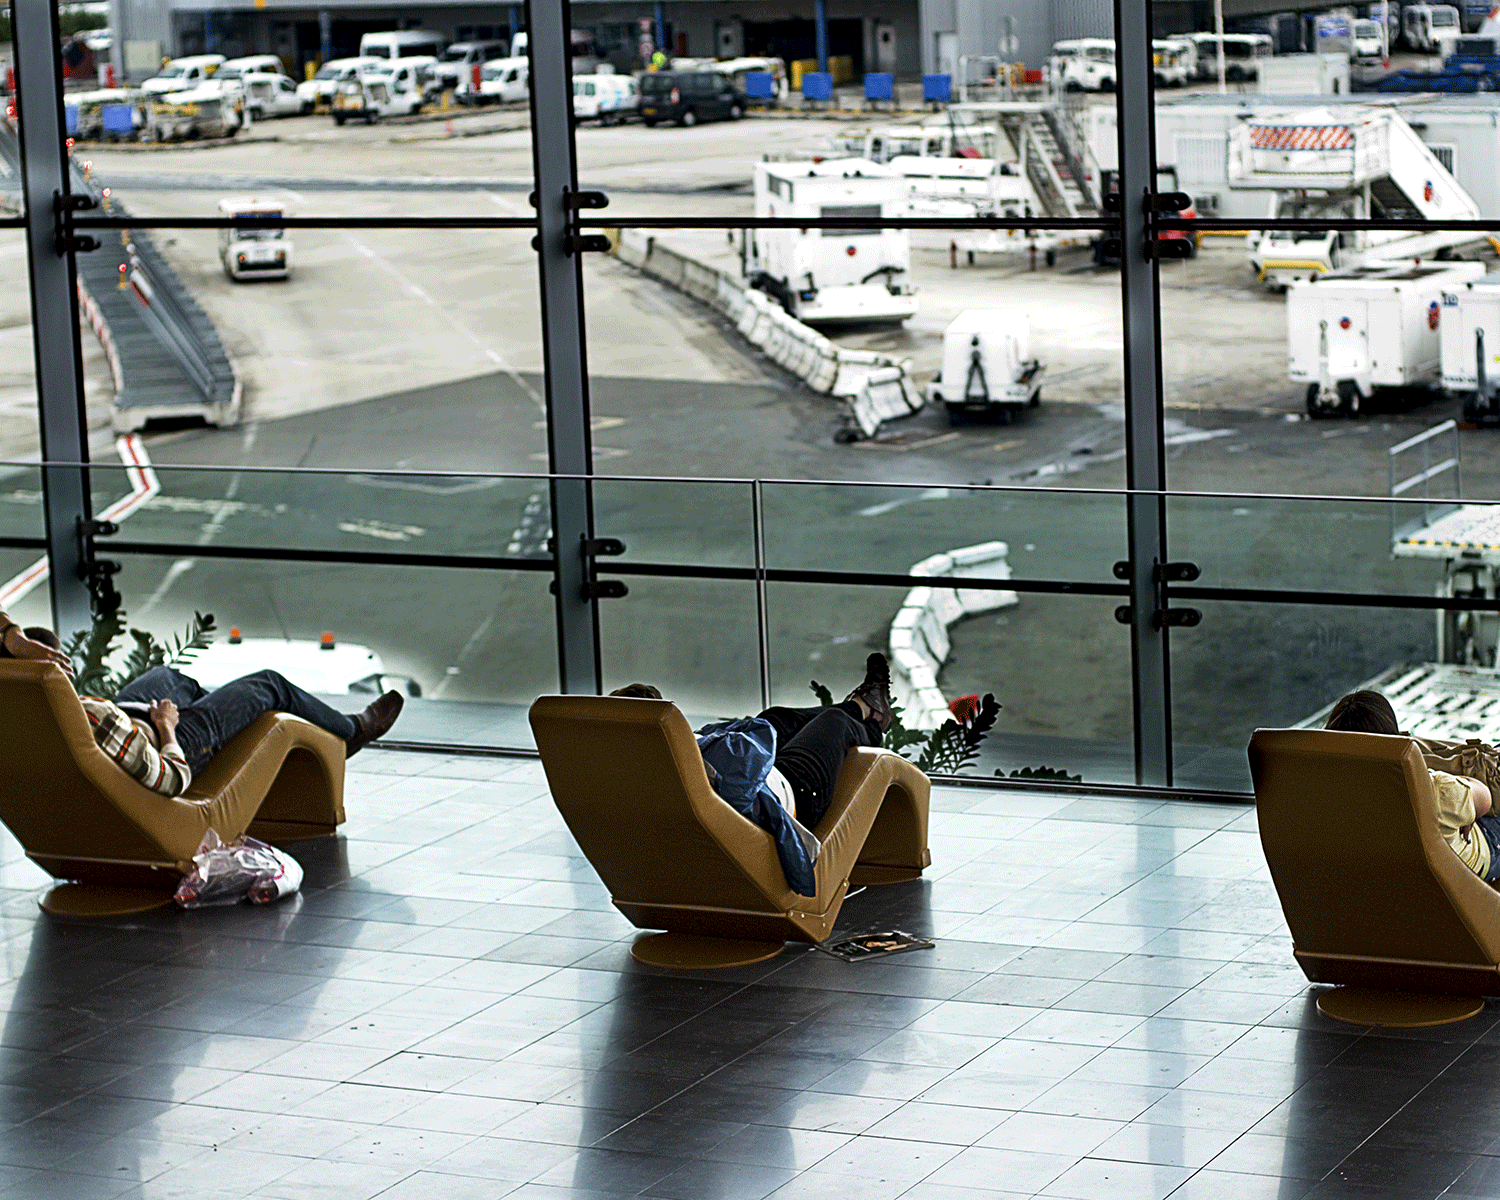 Passengers waiting for their flight at Charles de Gaulle airport in Paris